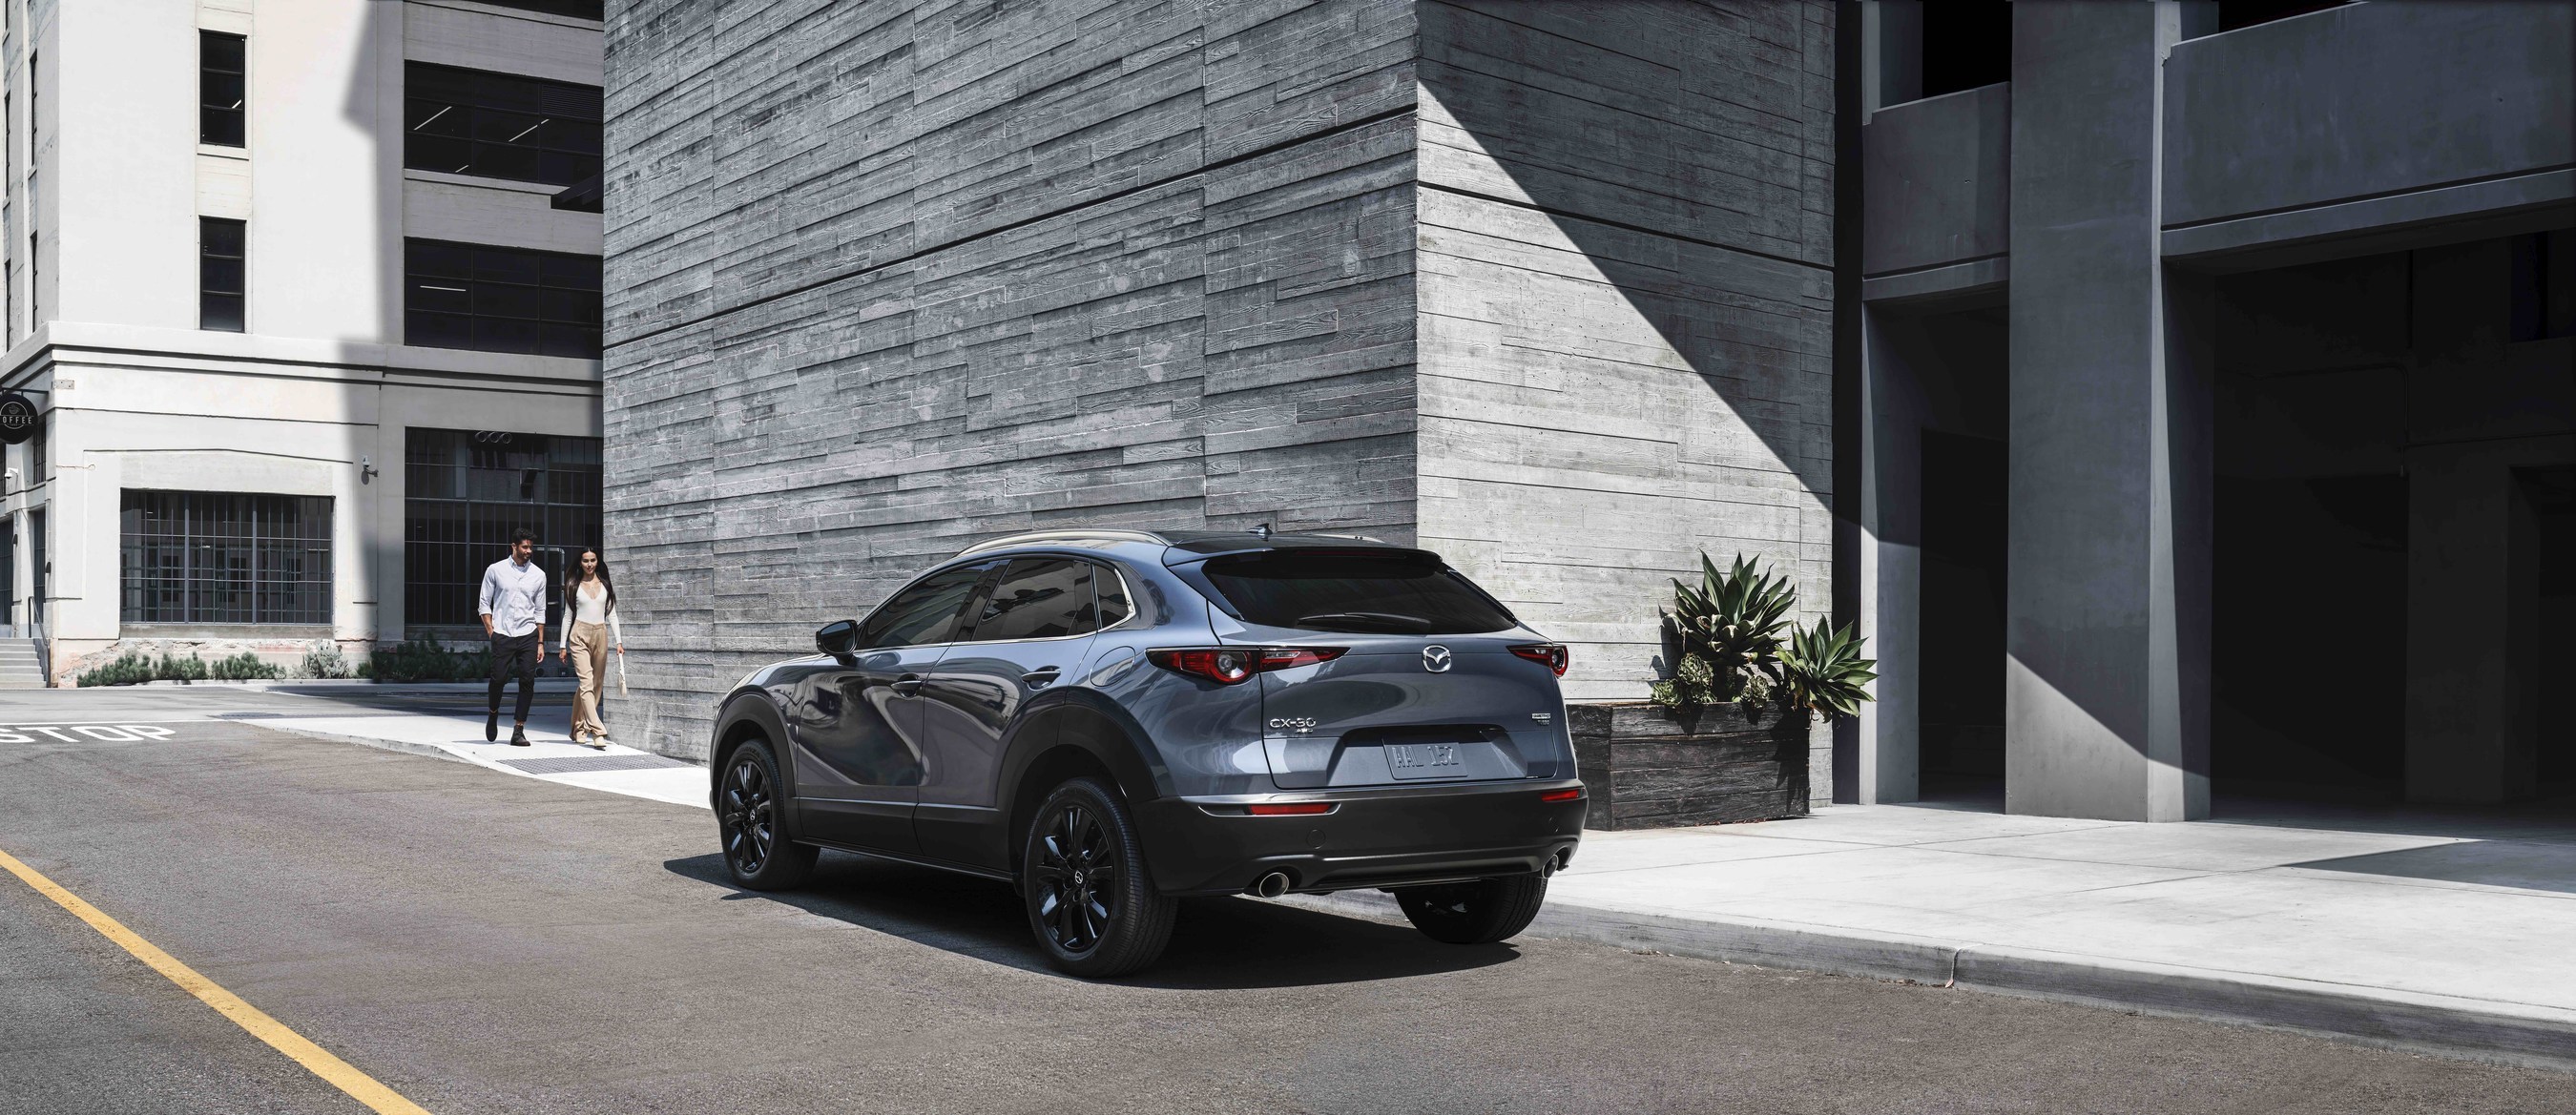 2021 Mazda CX-30 2.5 Turbo: Pricing and Packaging - Dec 1, 2020 | Mazda USA  News